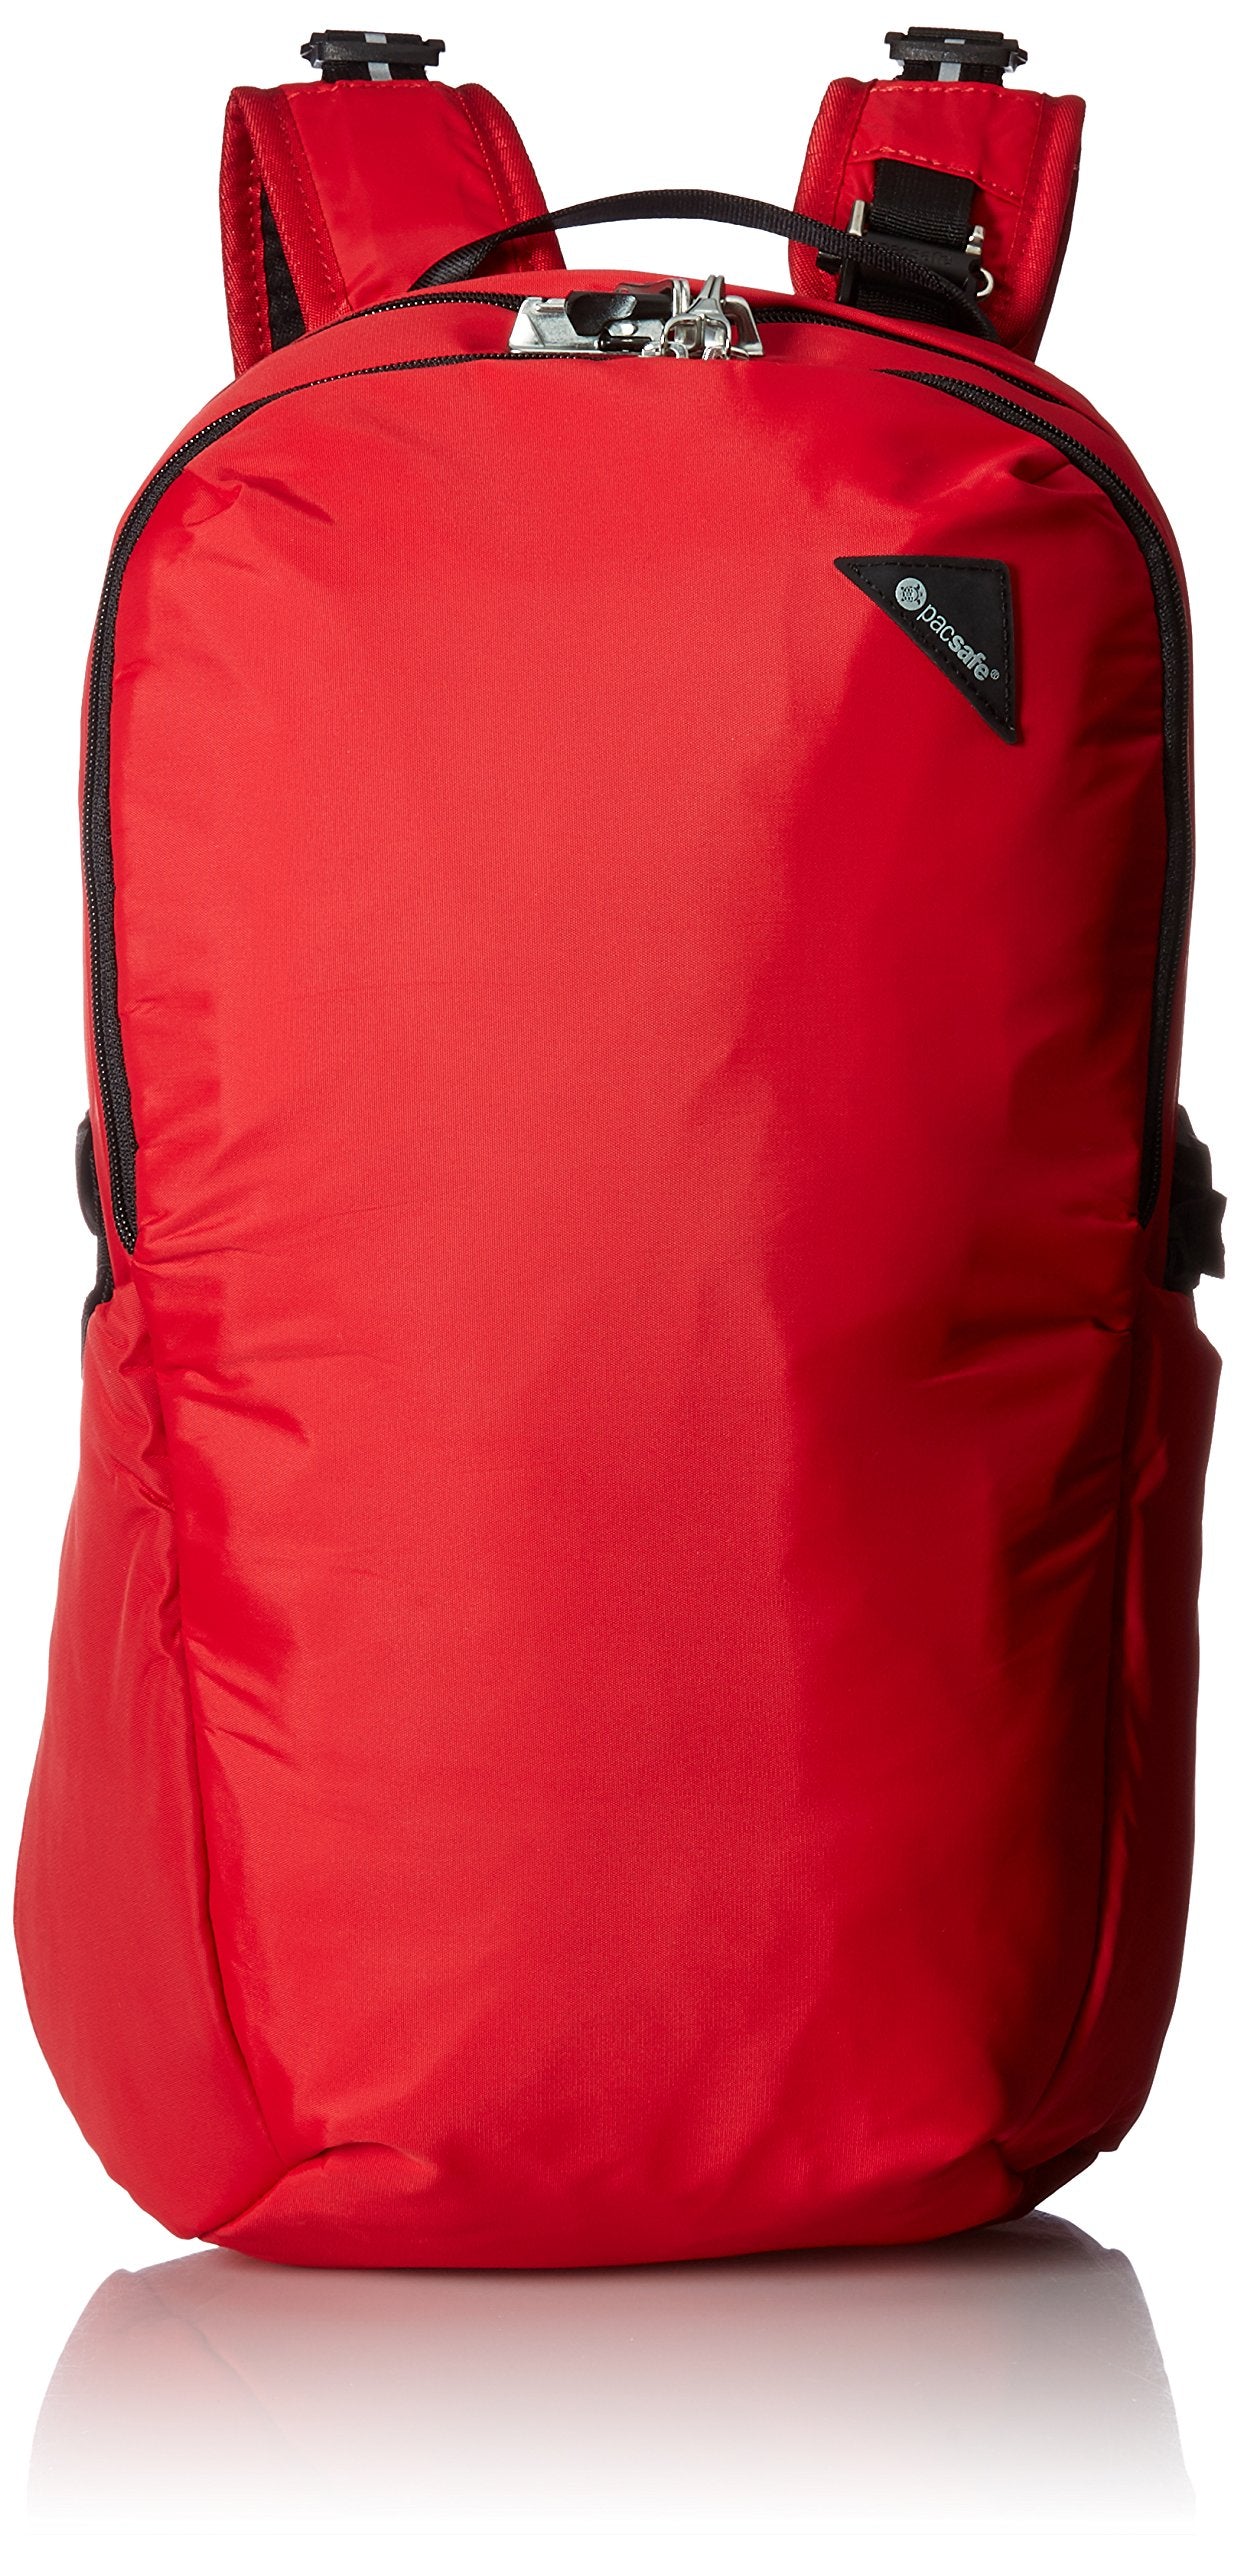 Backpack Review: Pacsafe Vibe 25L - The Gateway